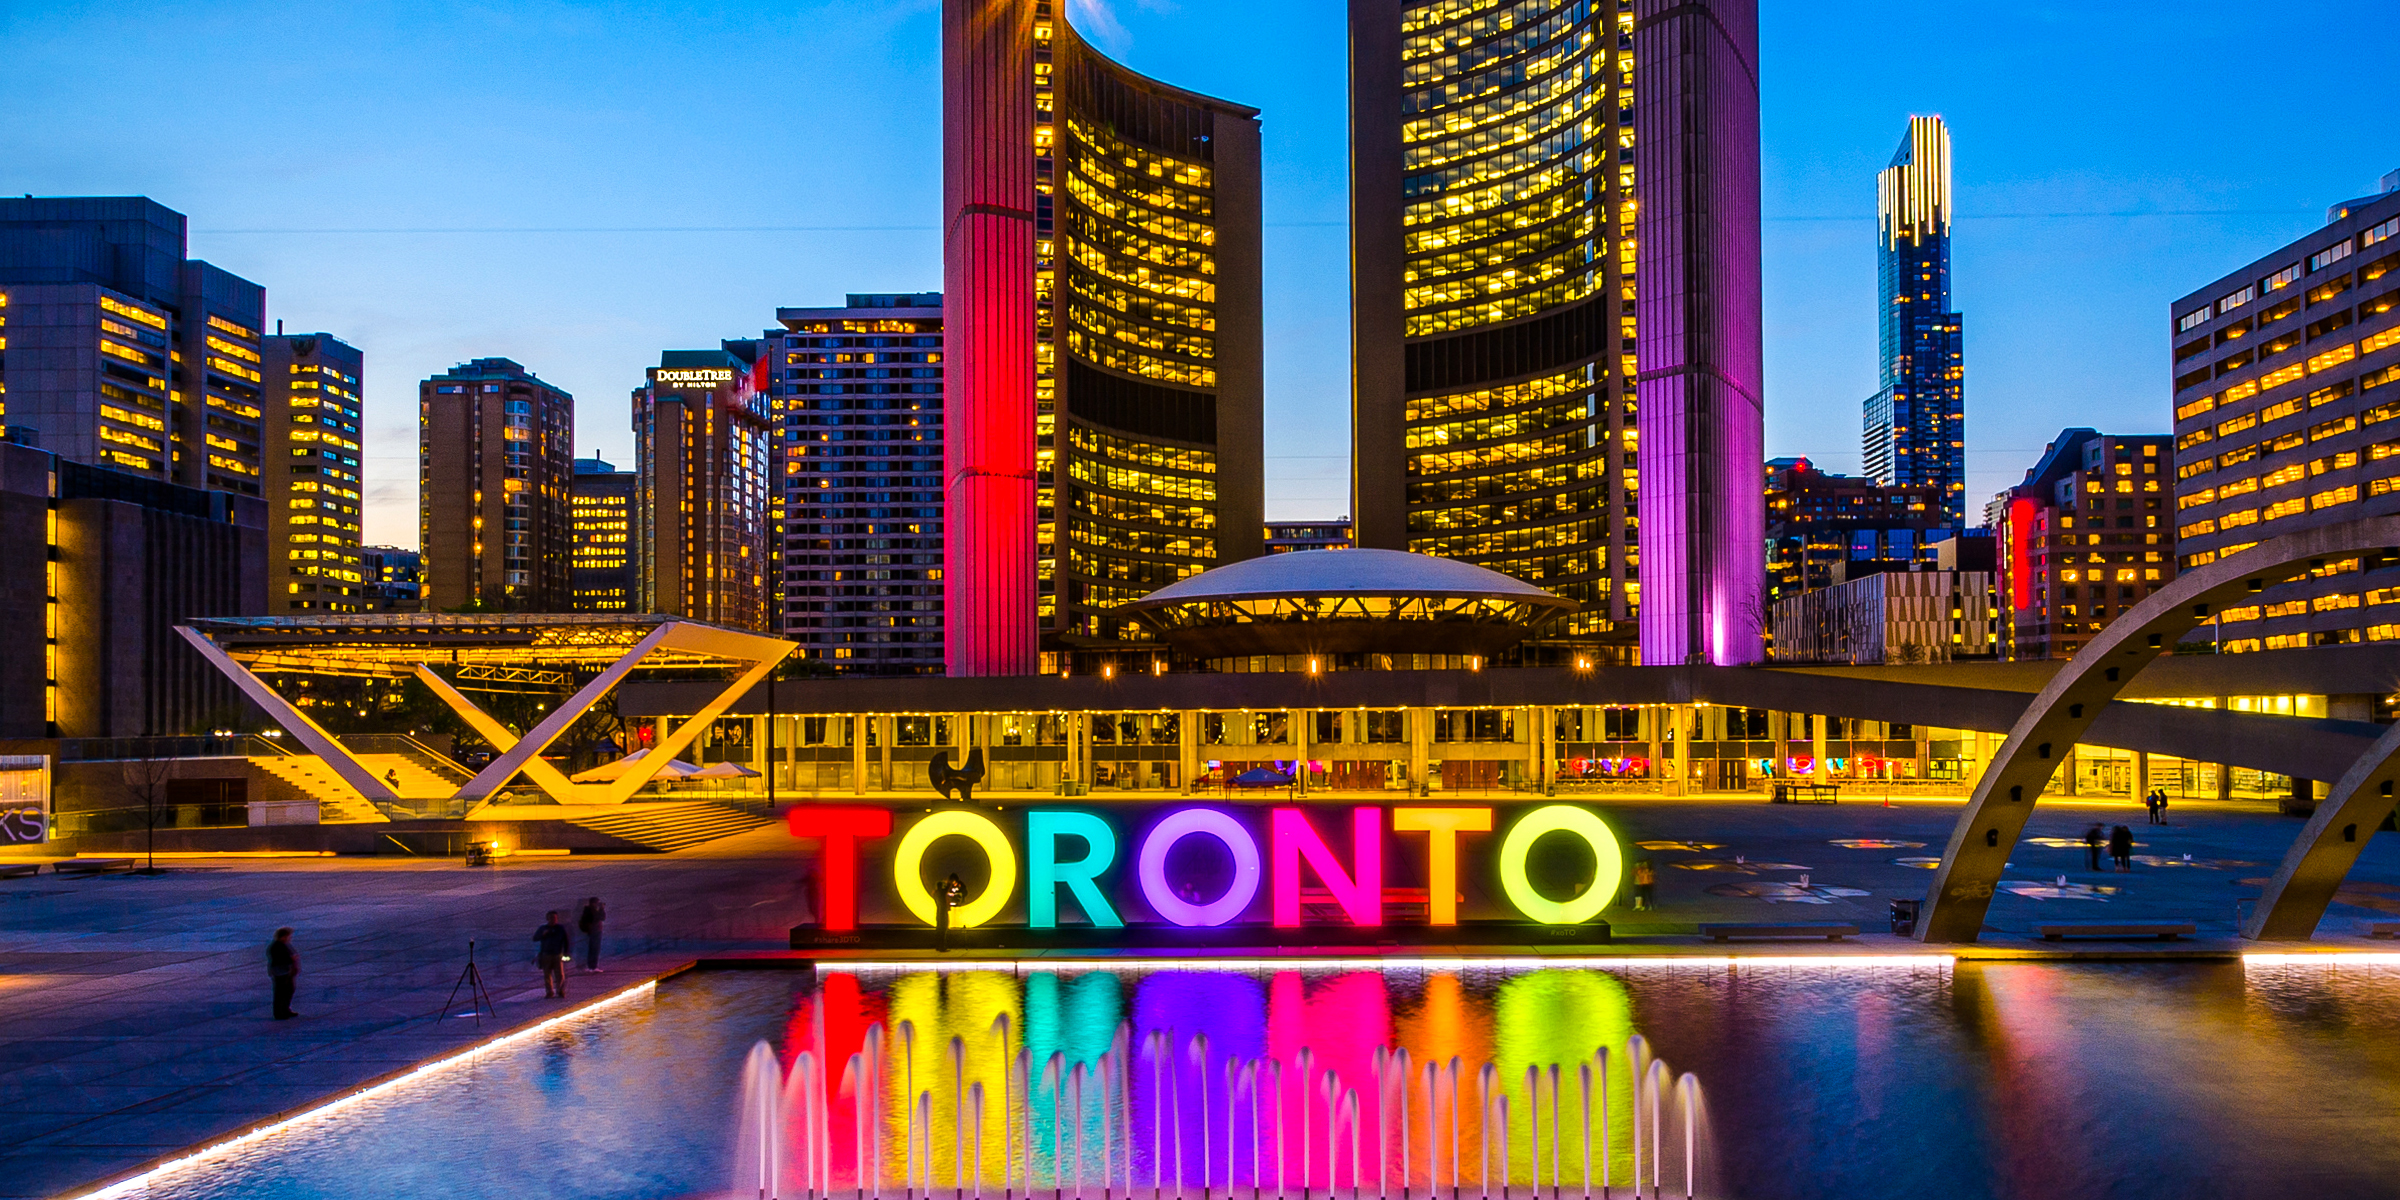 The Toronto Sign lights up downtown Toronto at twilight. | Source: Shutterstock